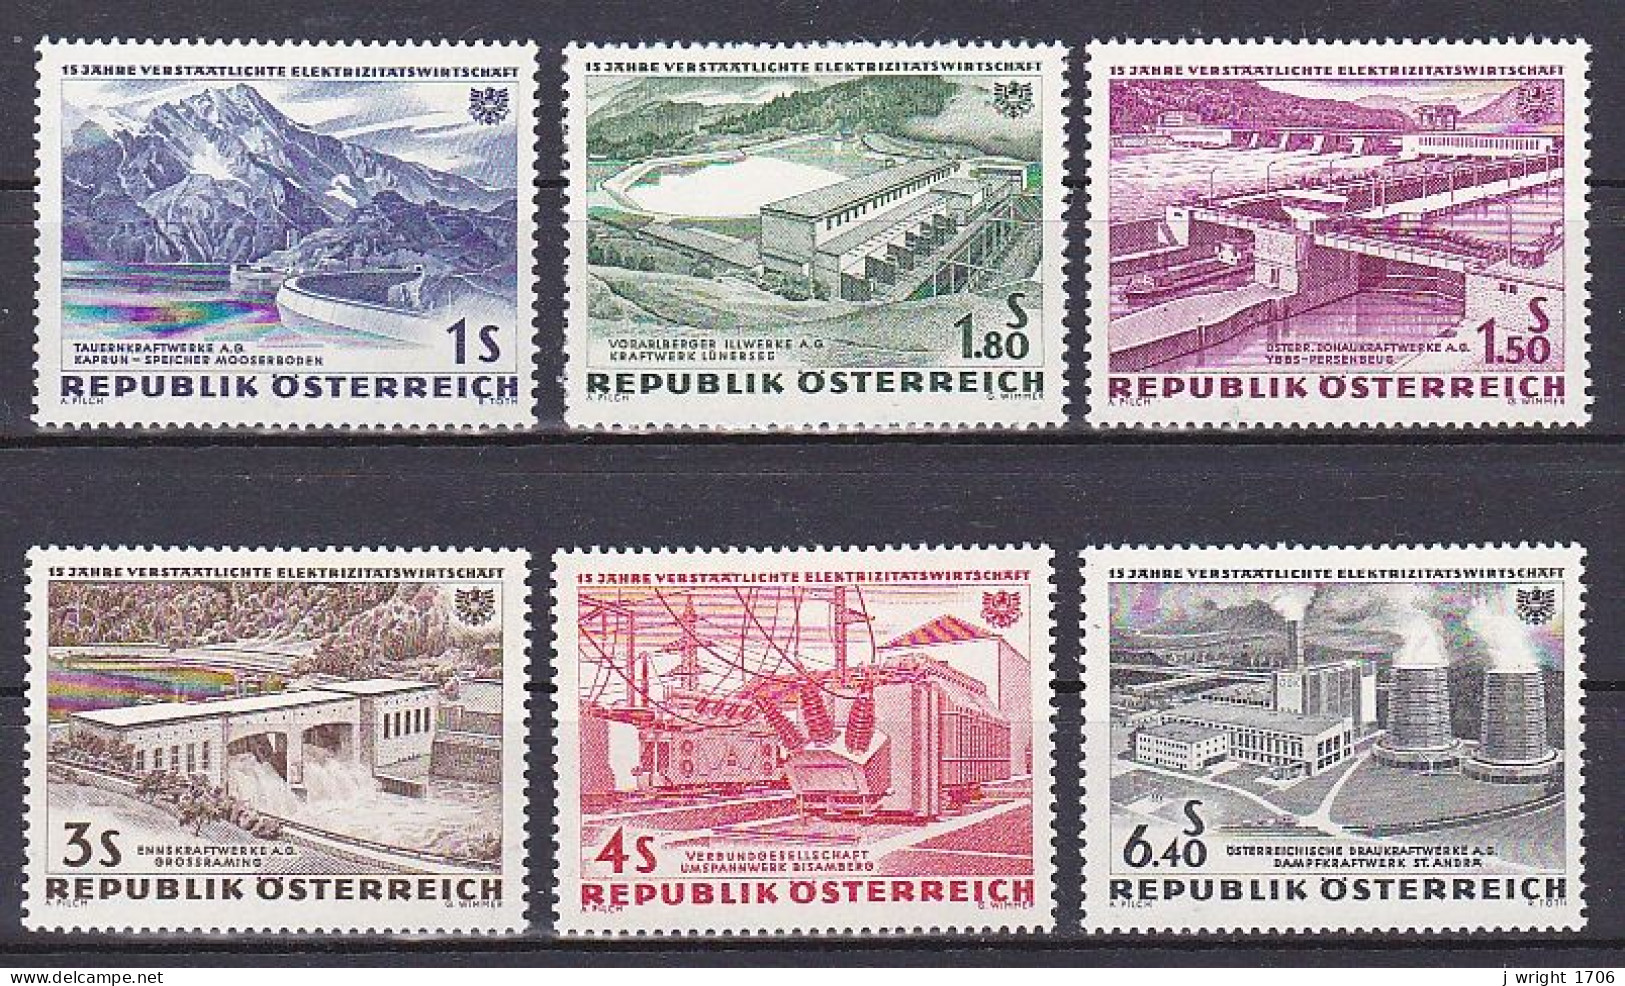 Austria, 1962, Electric Power Industries Nationalization 15th Anniv, Set, MNH - Unused Stamps